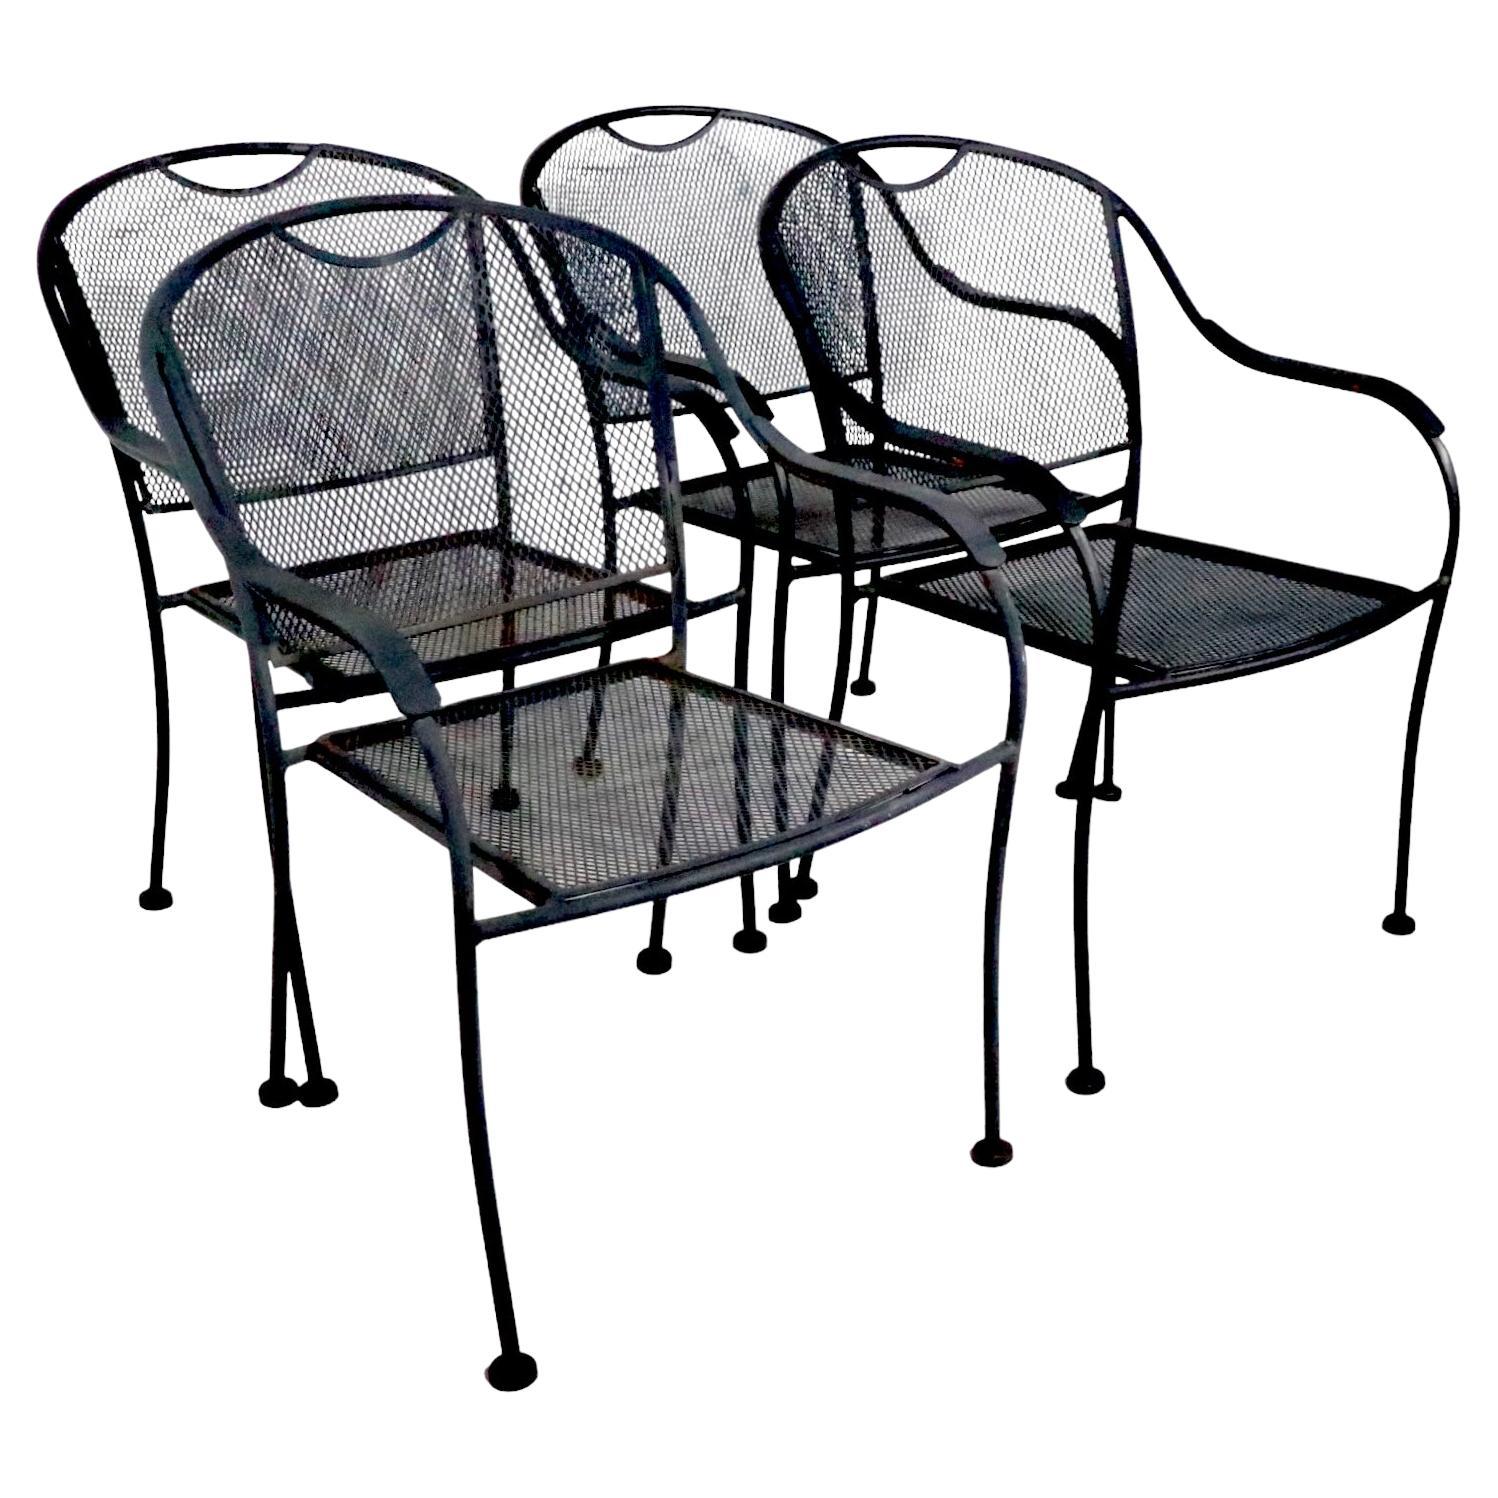 Set of Four Modernist Metal Garden Patio Dining Chairs in the style of Woodard